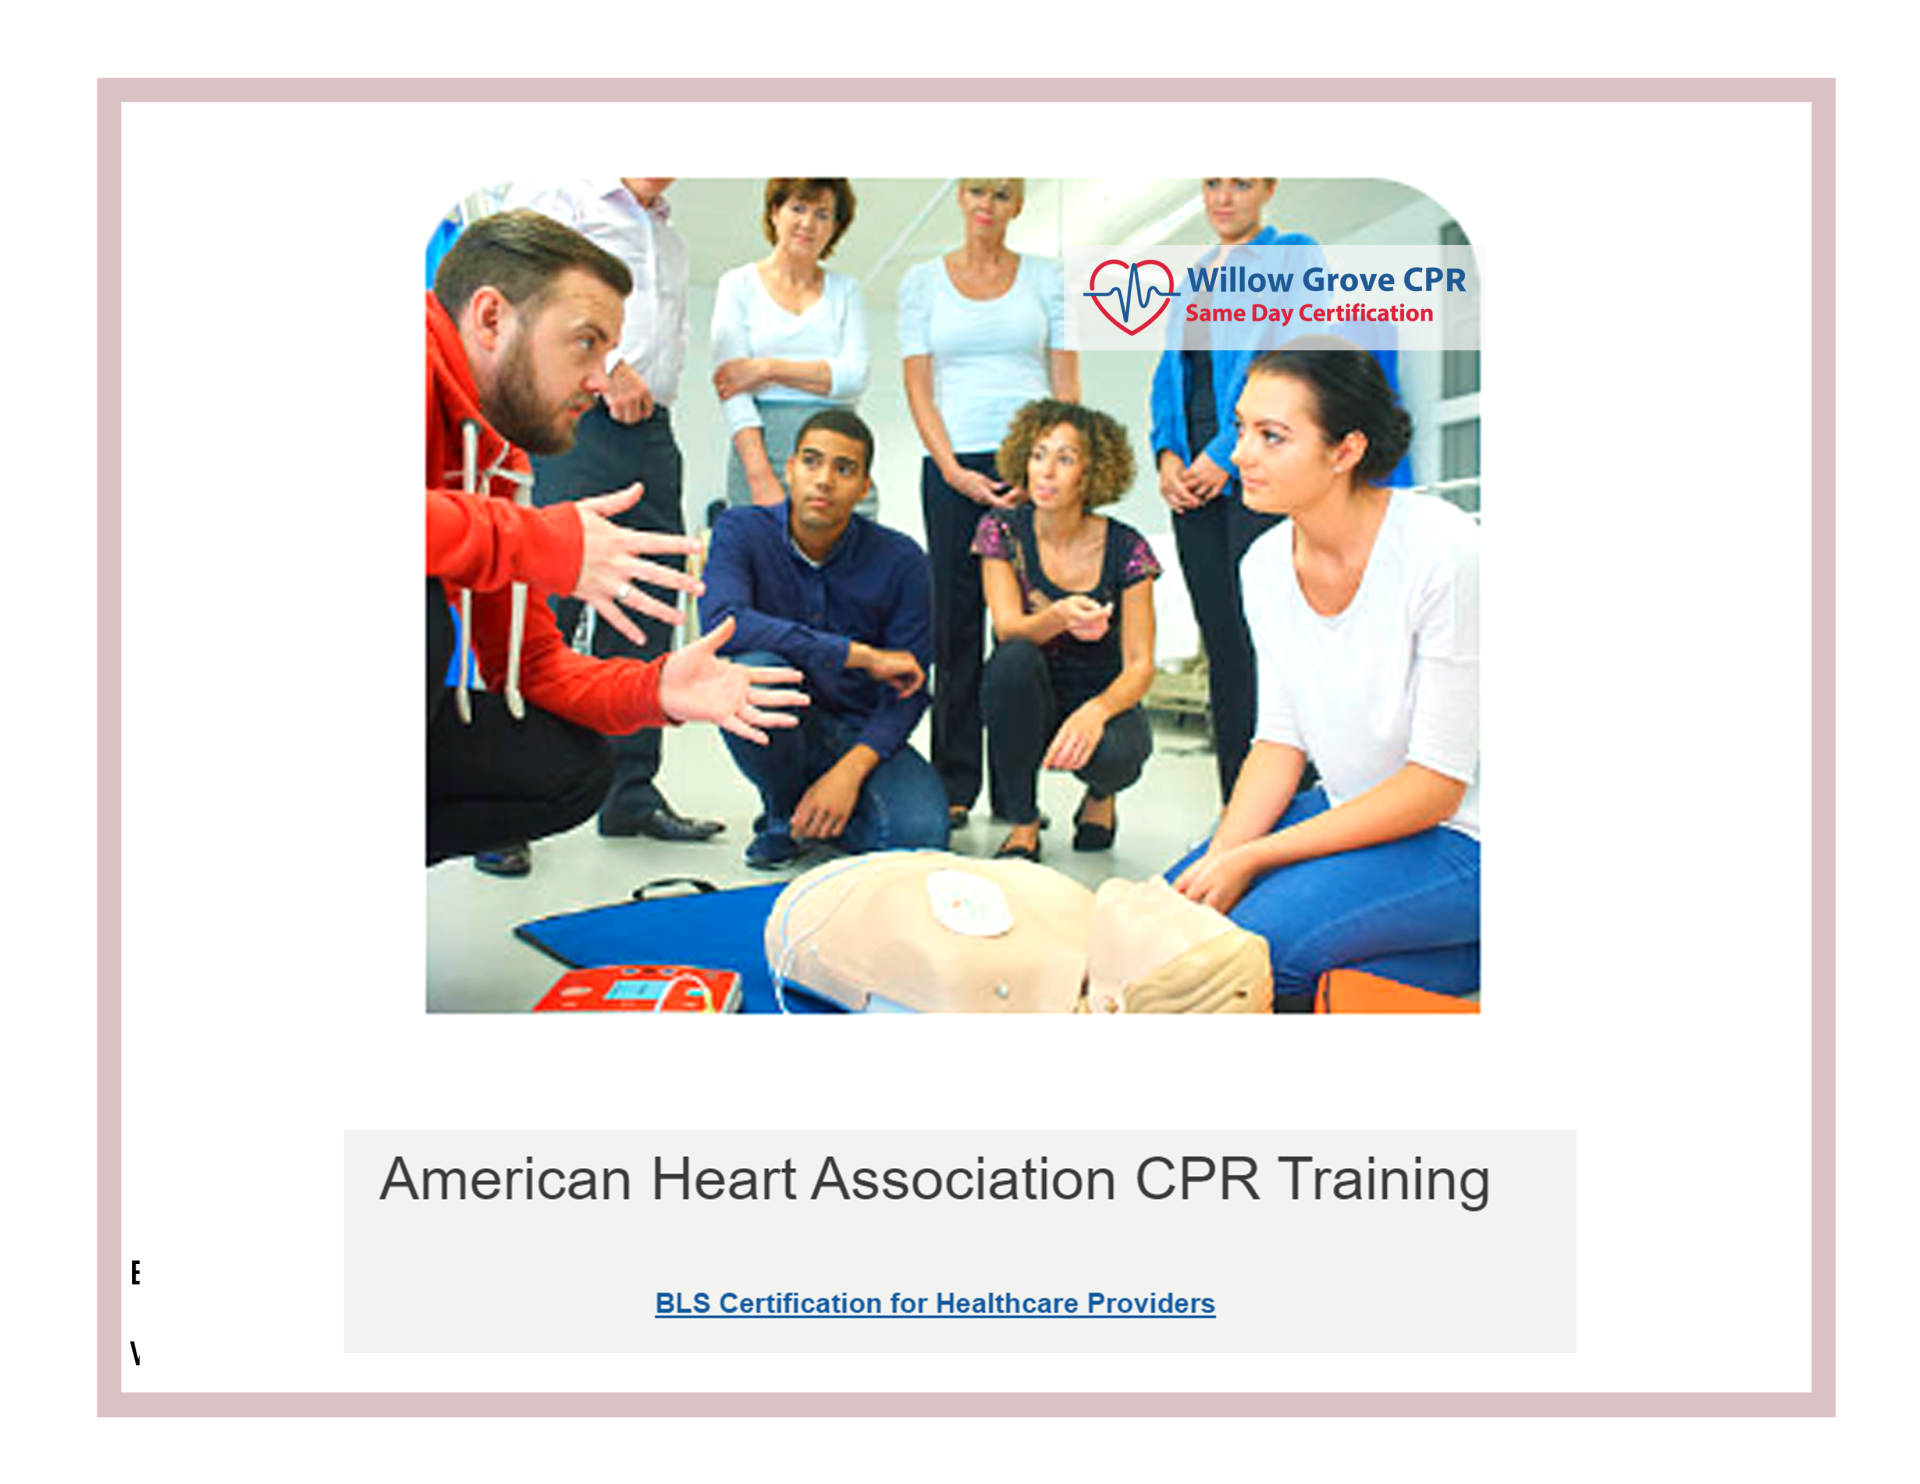 American Heart Association Certification Willow Grove Cpr 8173